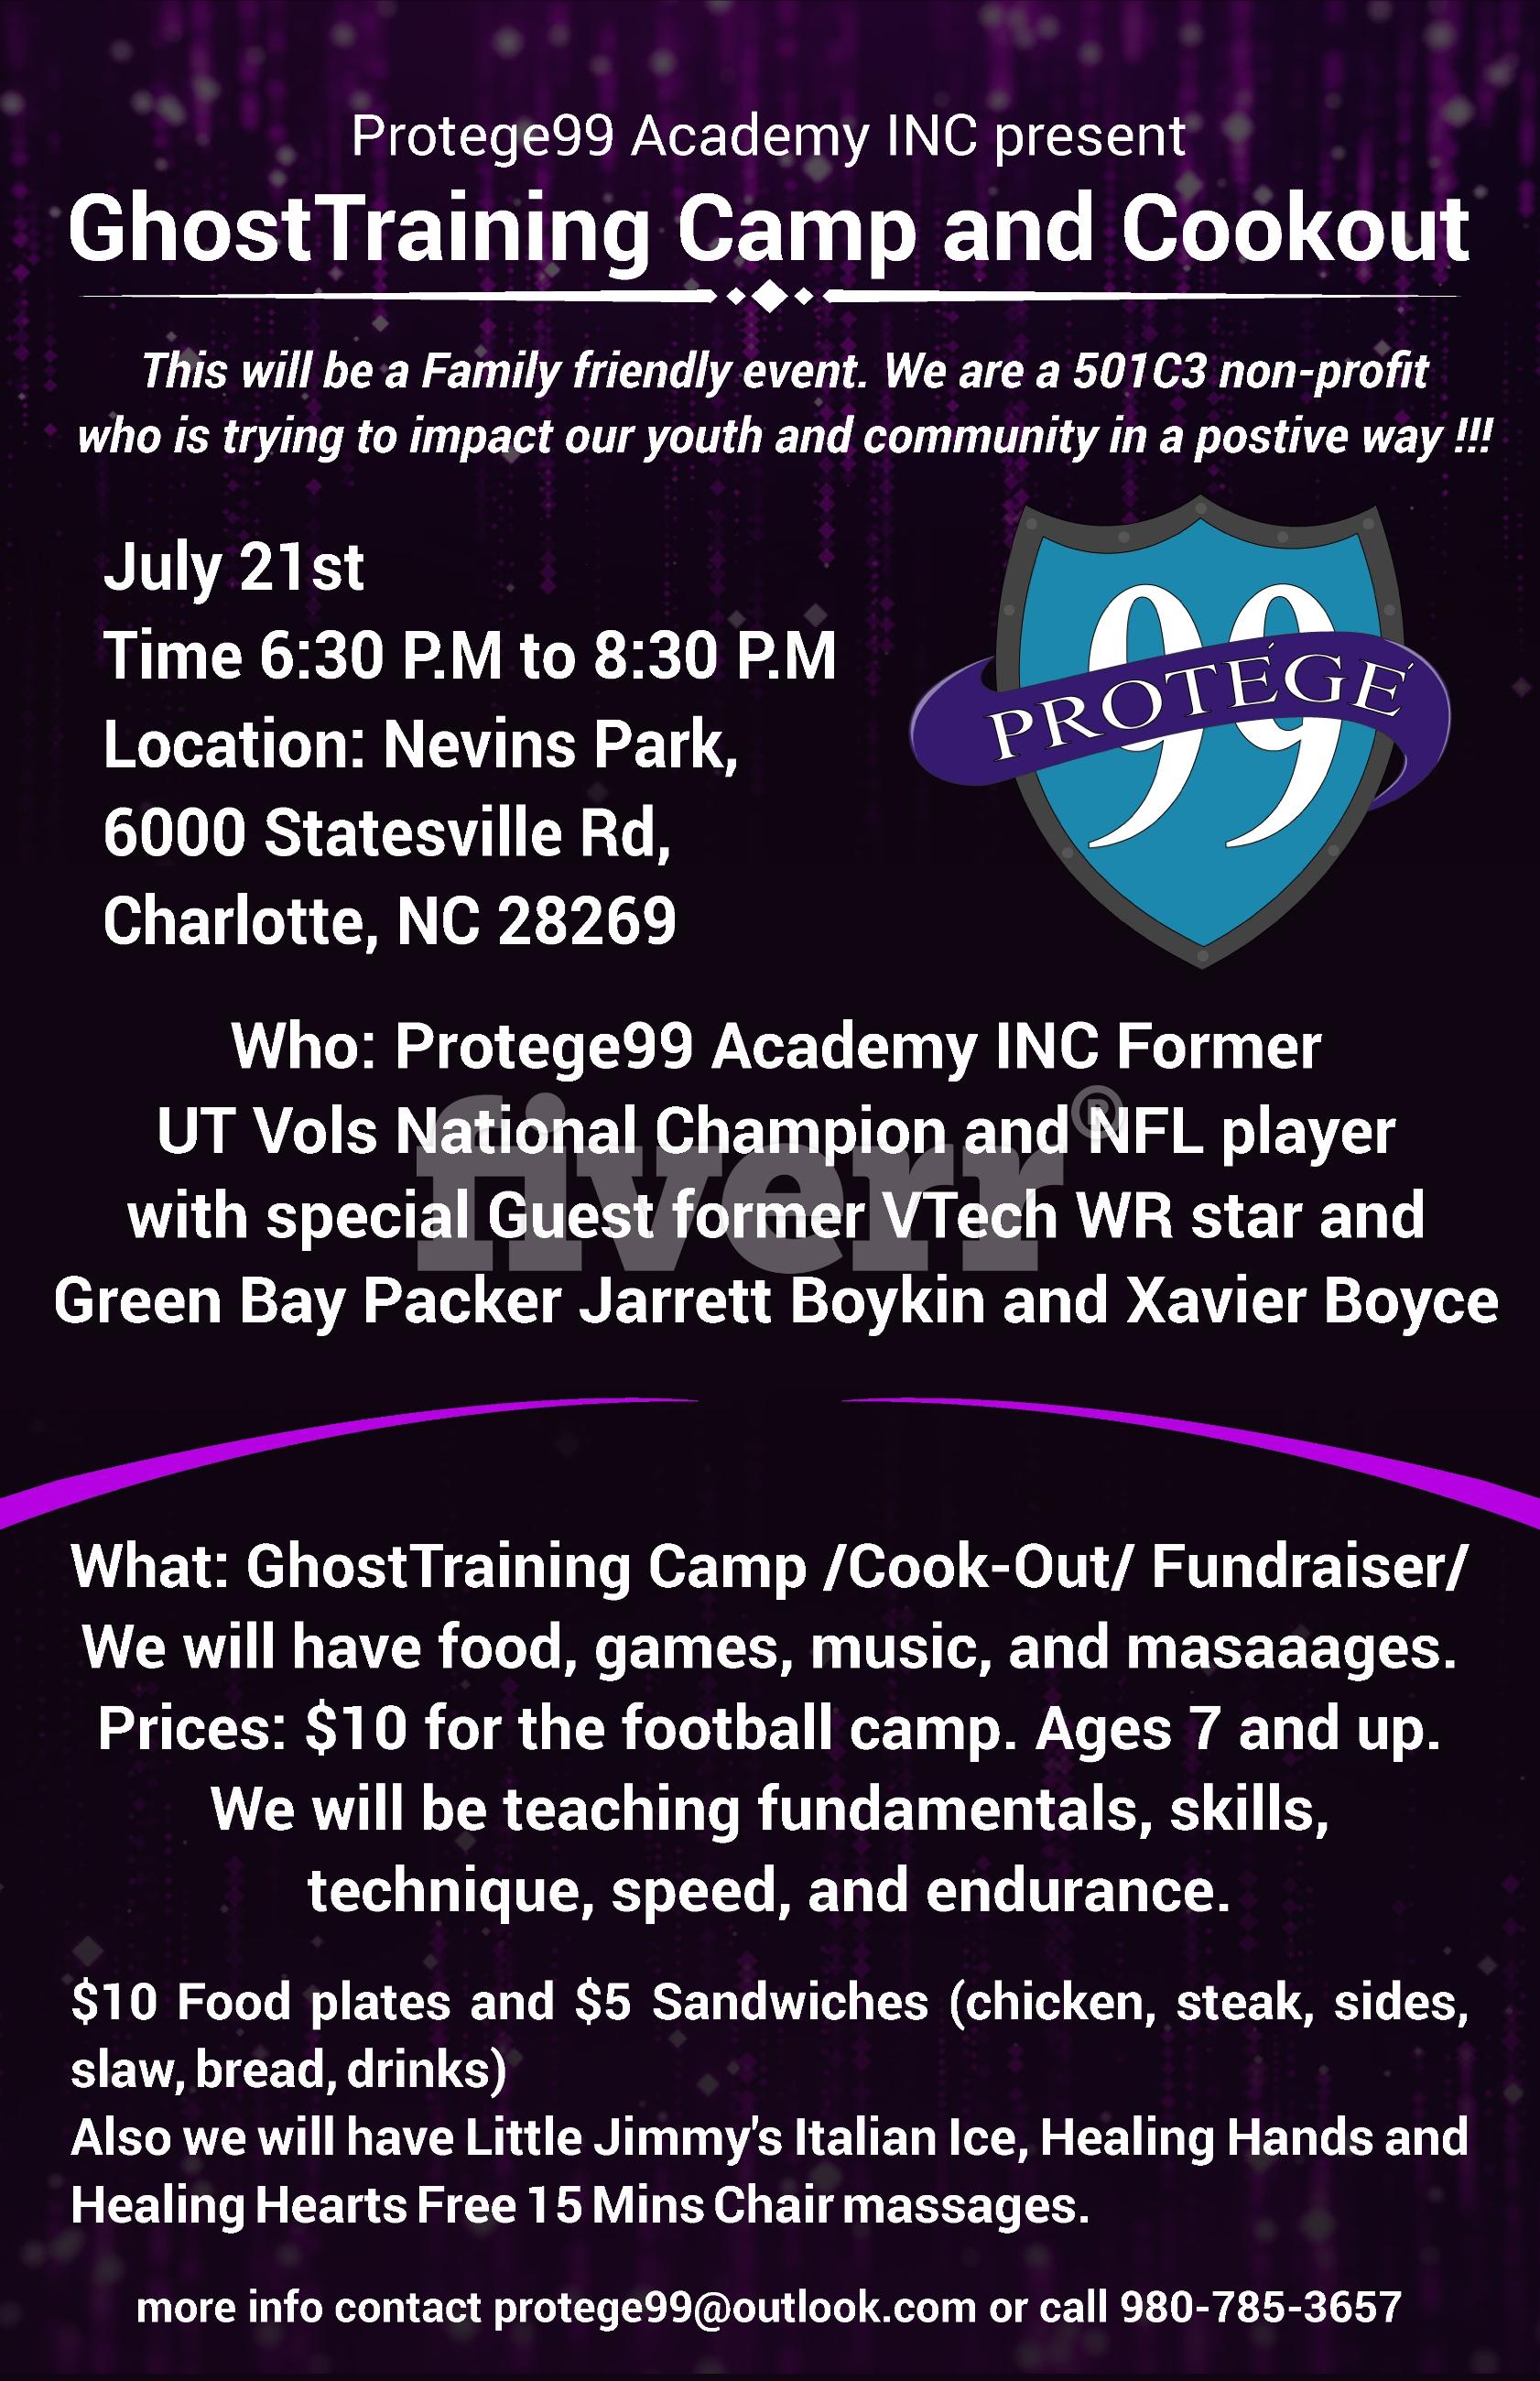 GhostTraining Camp & Cookout